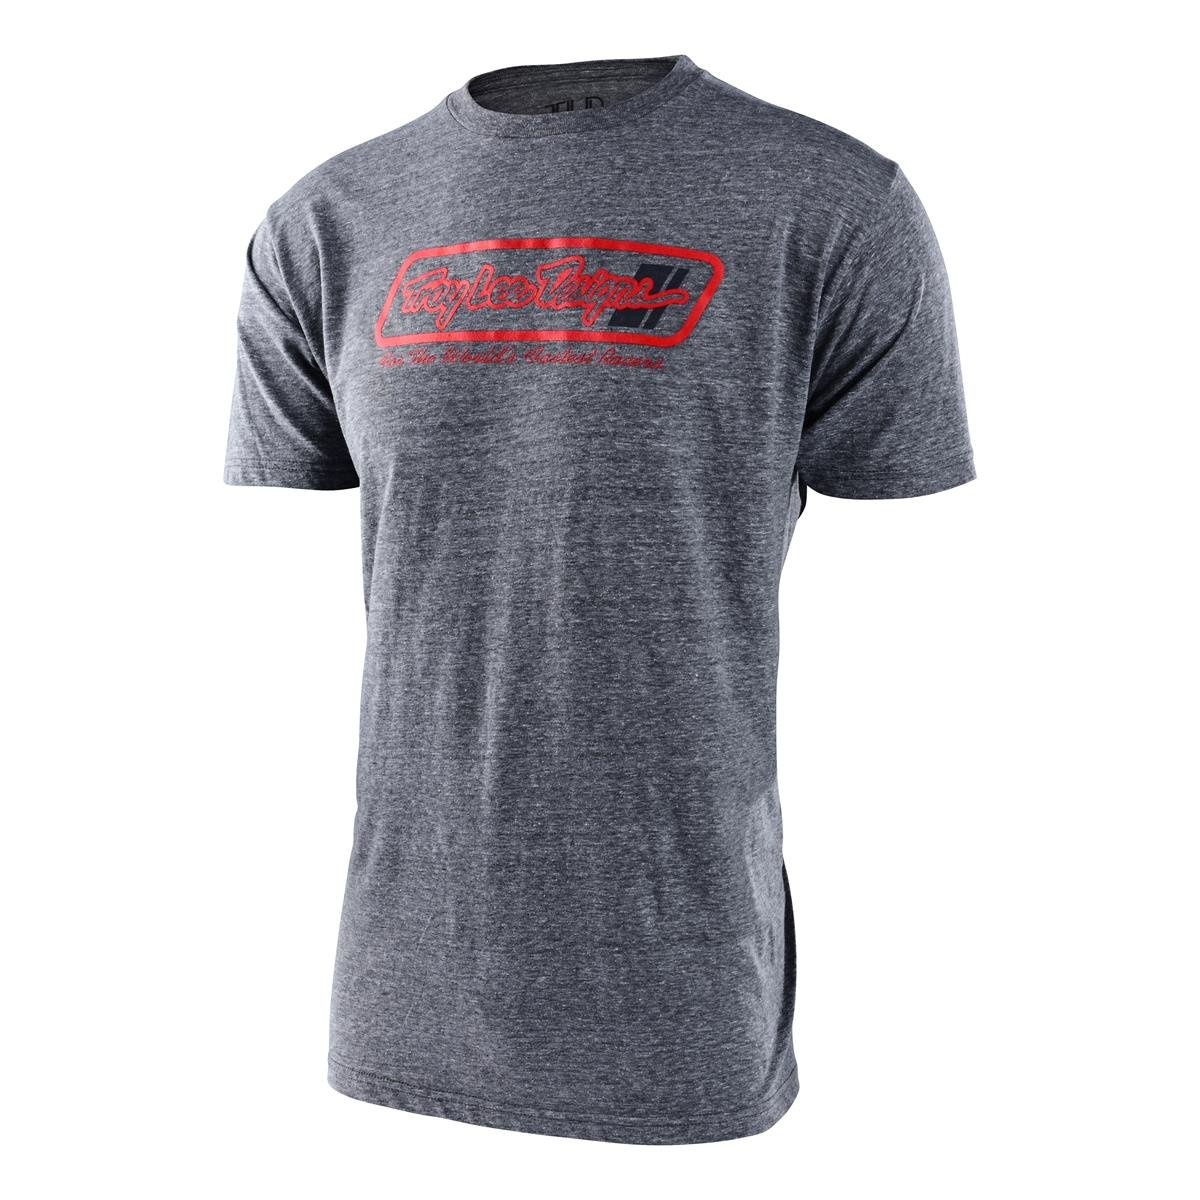 GO FASTER SS TEE (SAVE 50% NOW! ENTER CODE TLD50 AT CHECKOUT.)